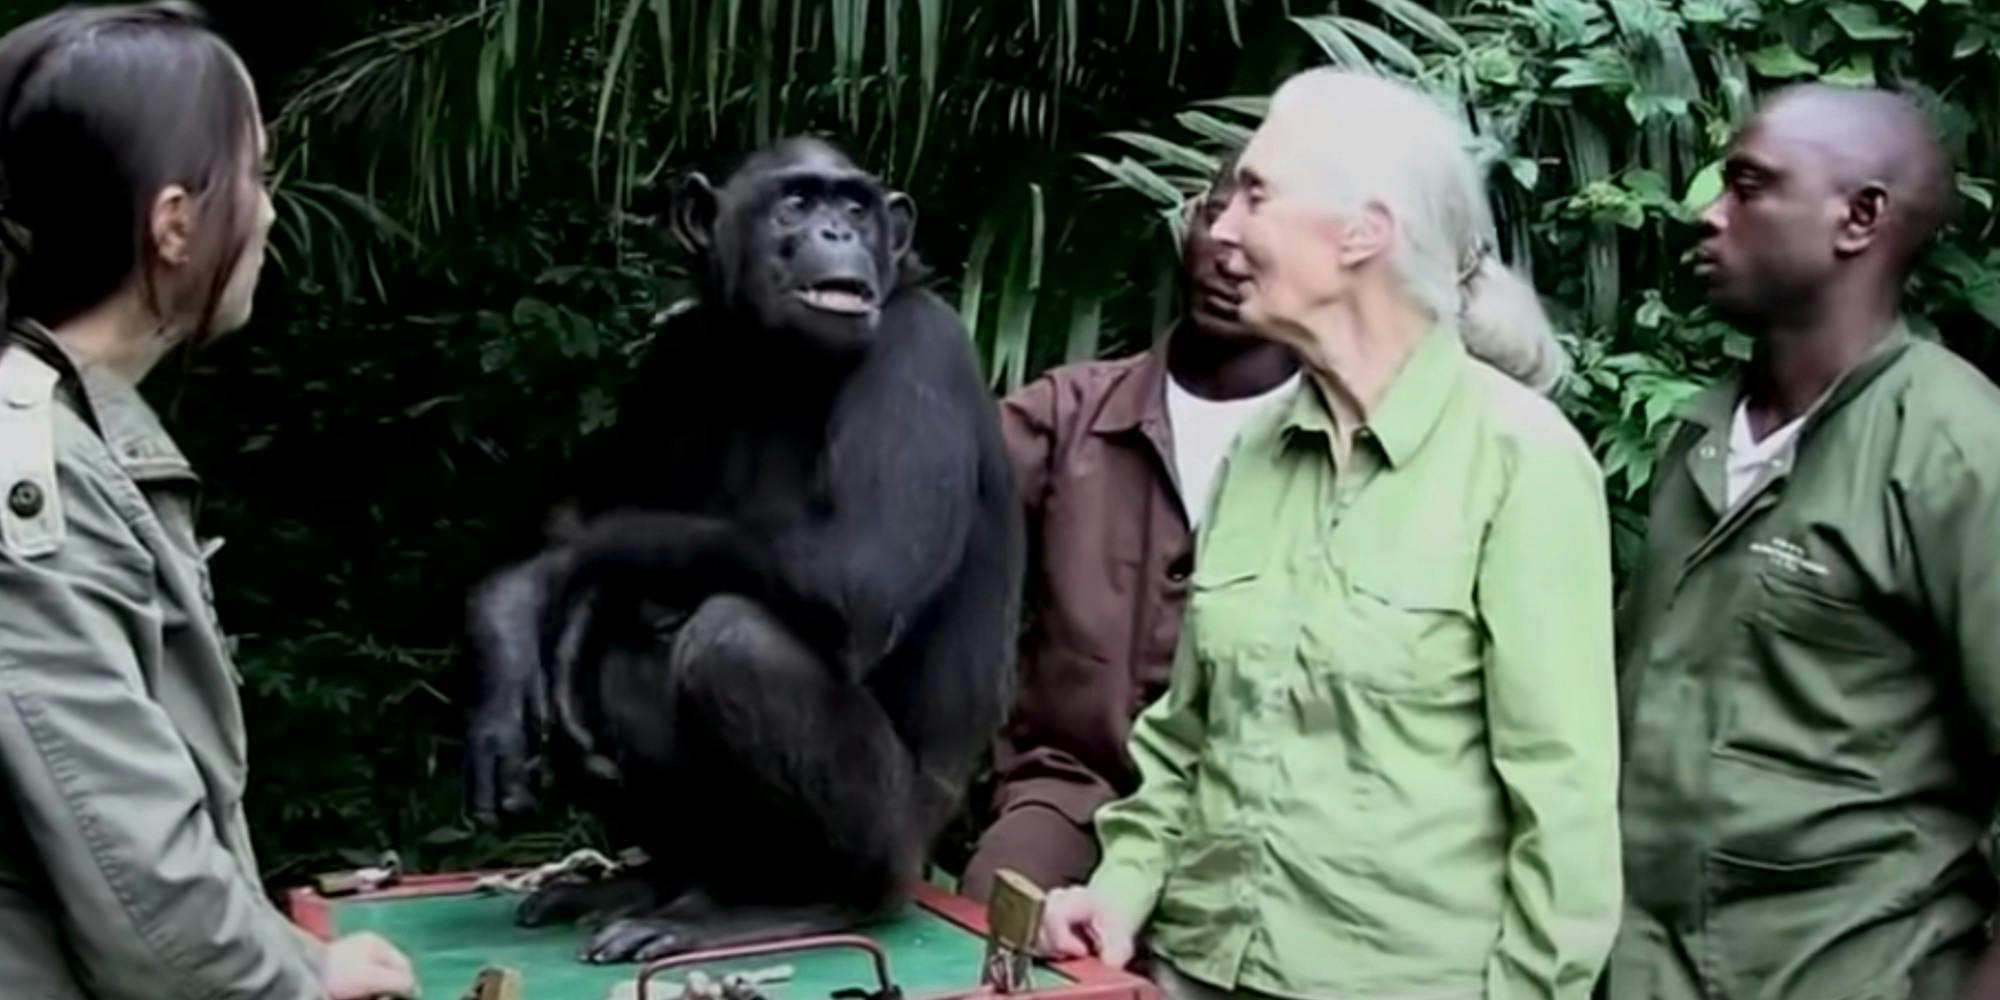 Men and women next to a chimpanzee in the jungle